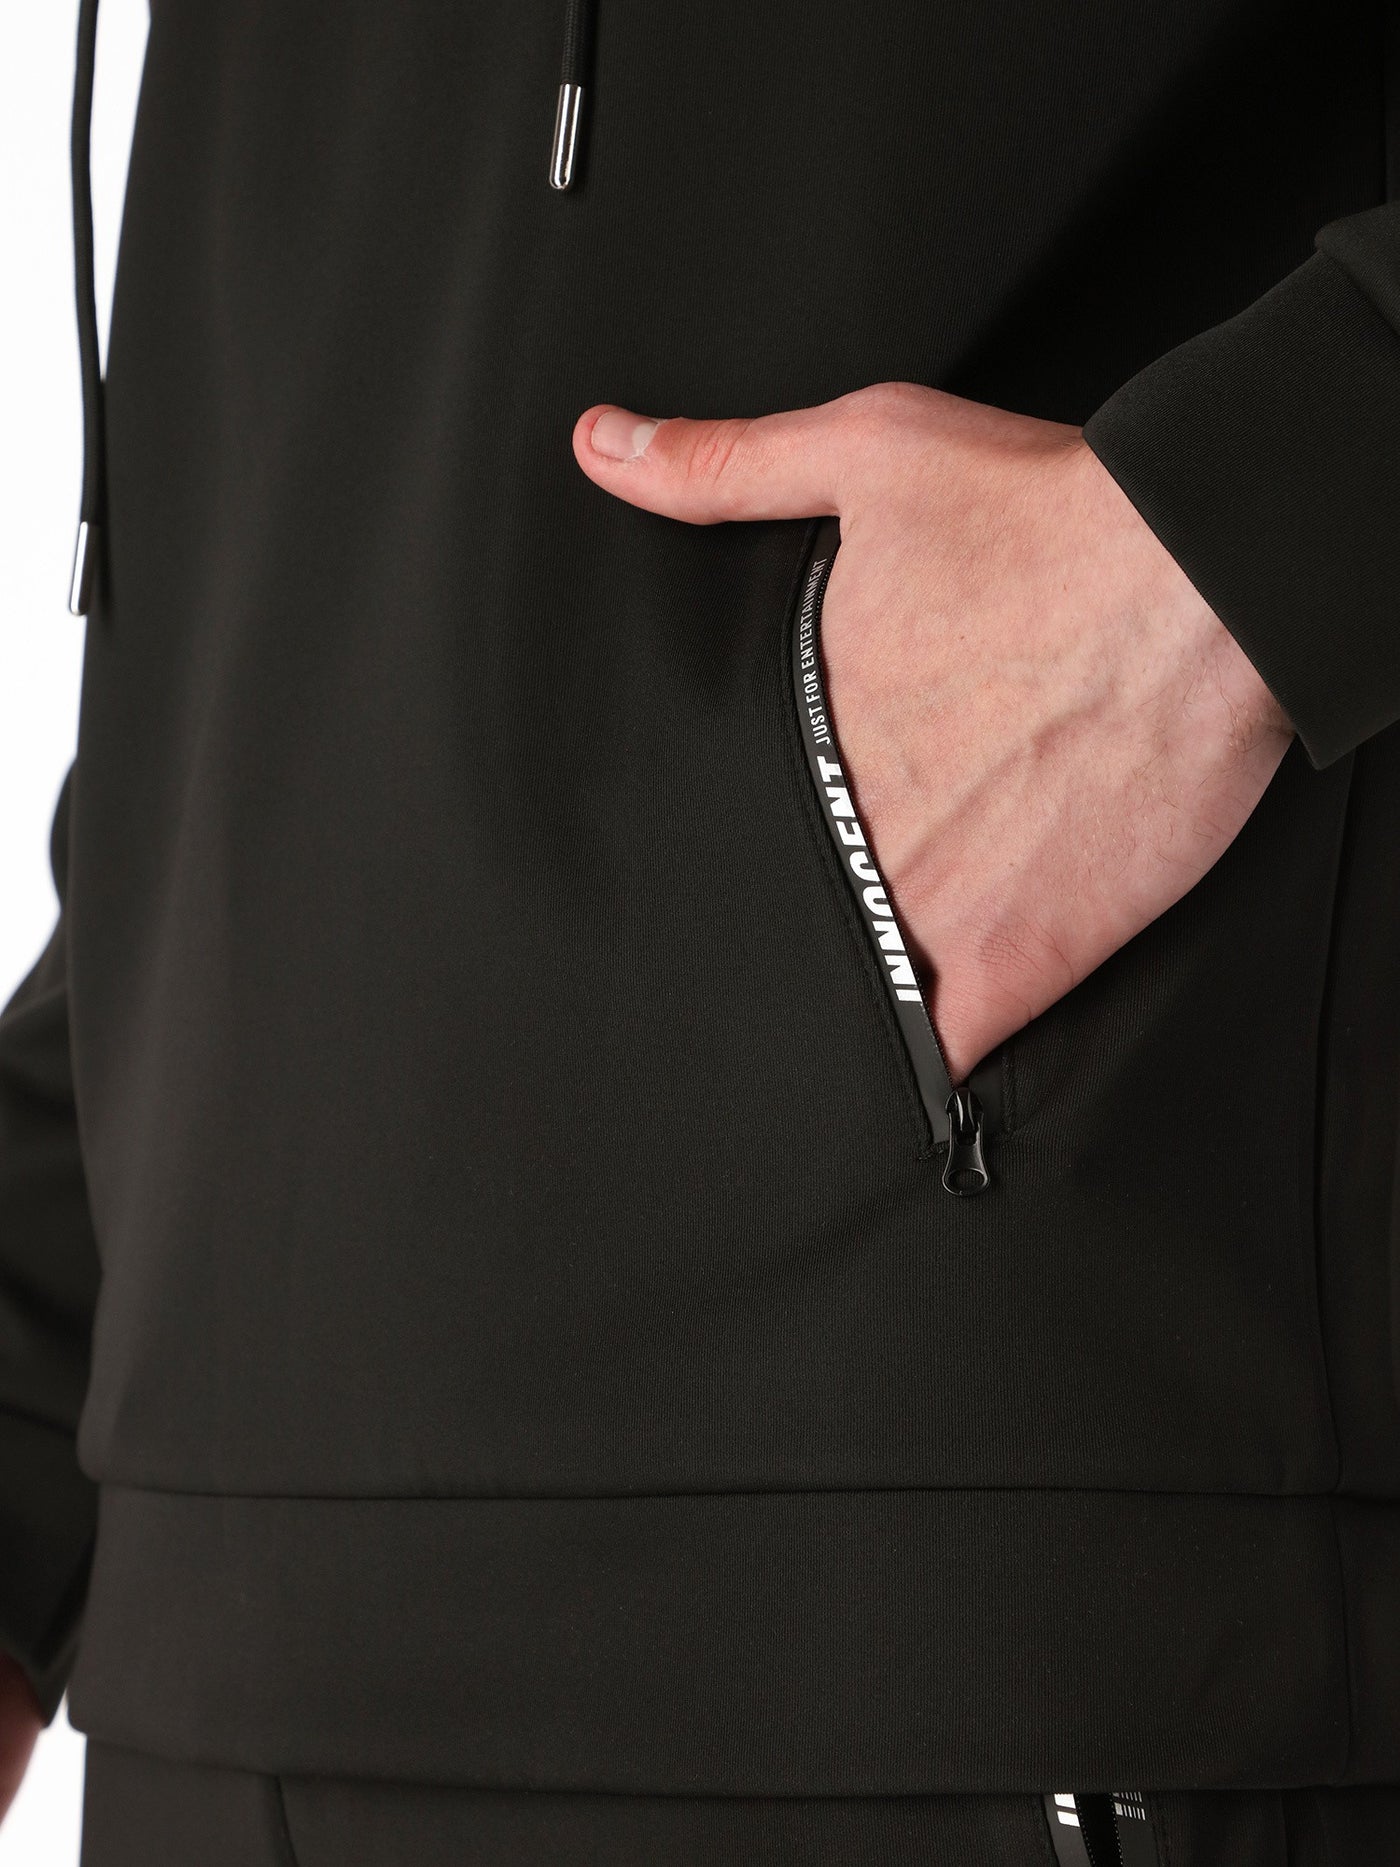 Hoodie - Front Pockets with Zipper Closure